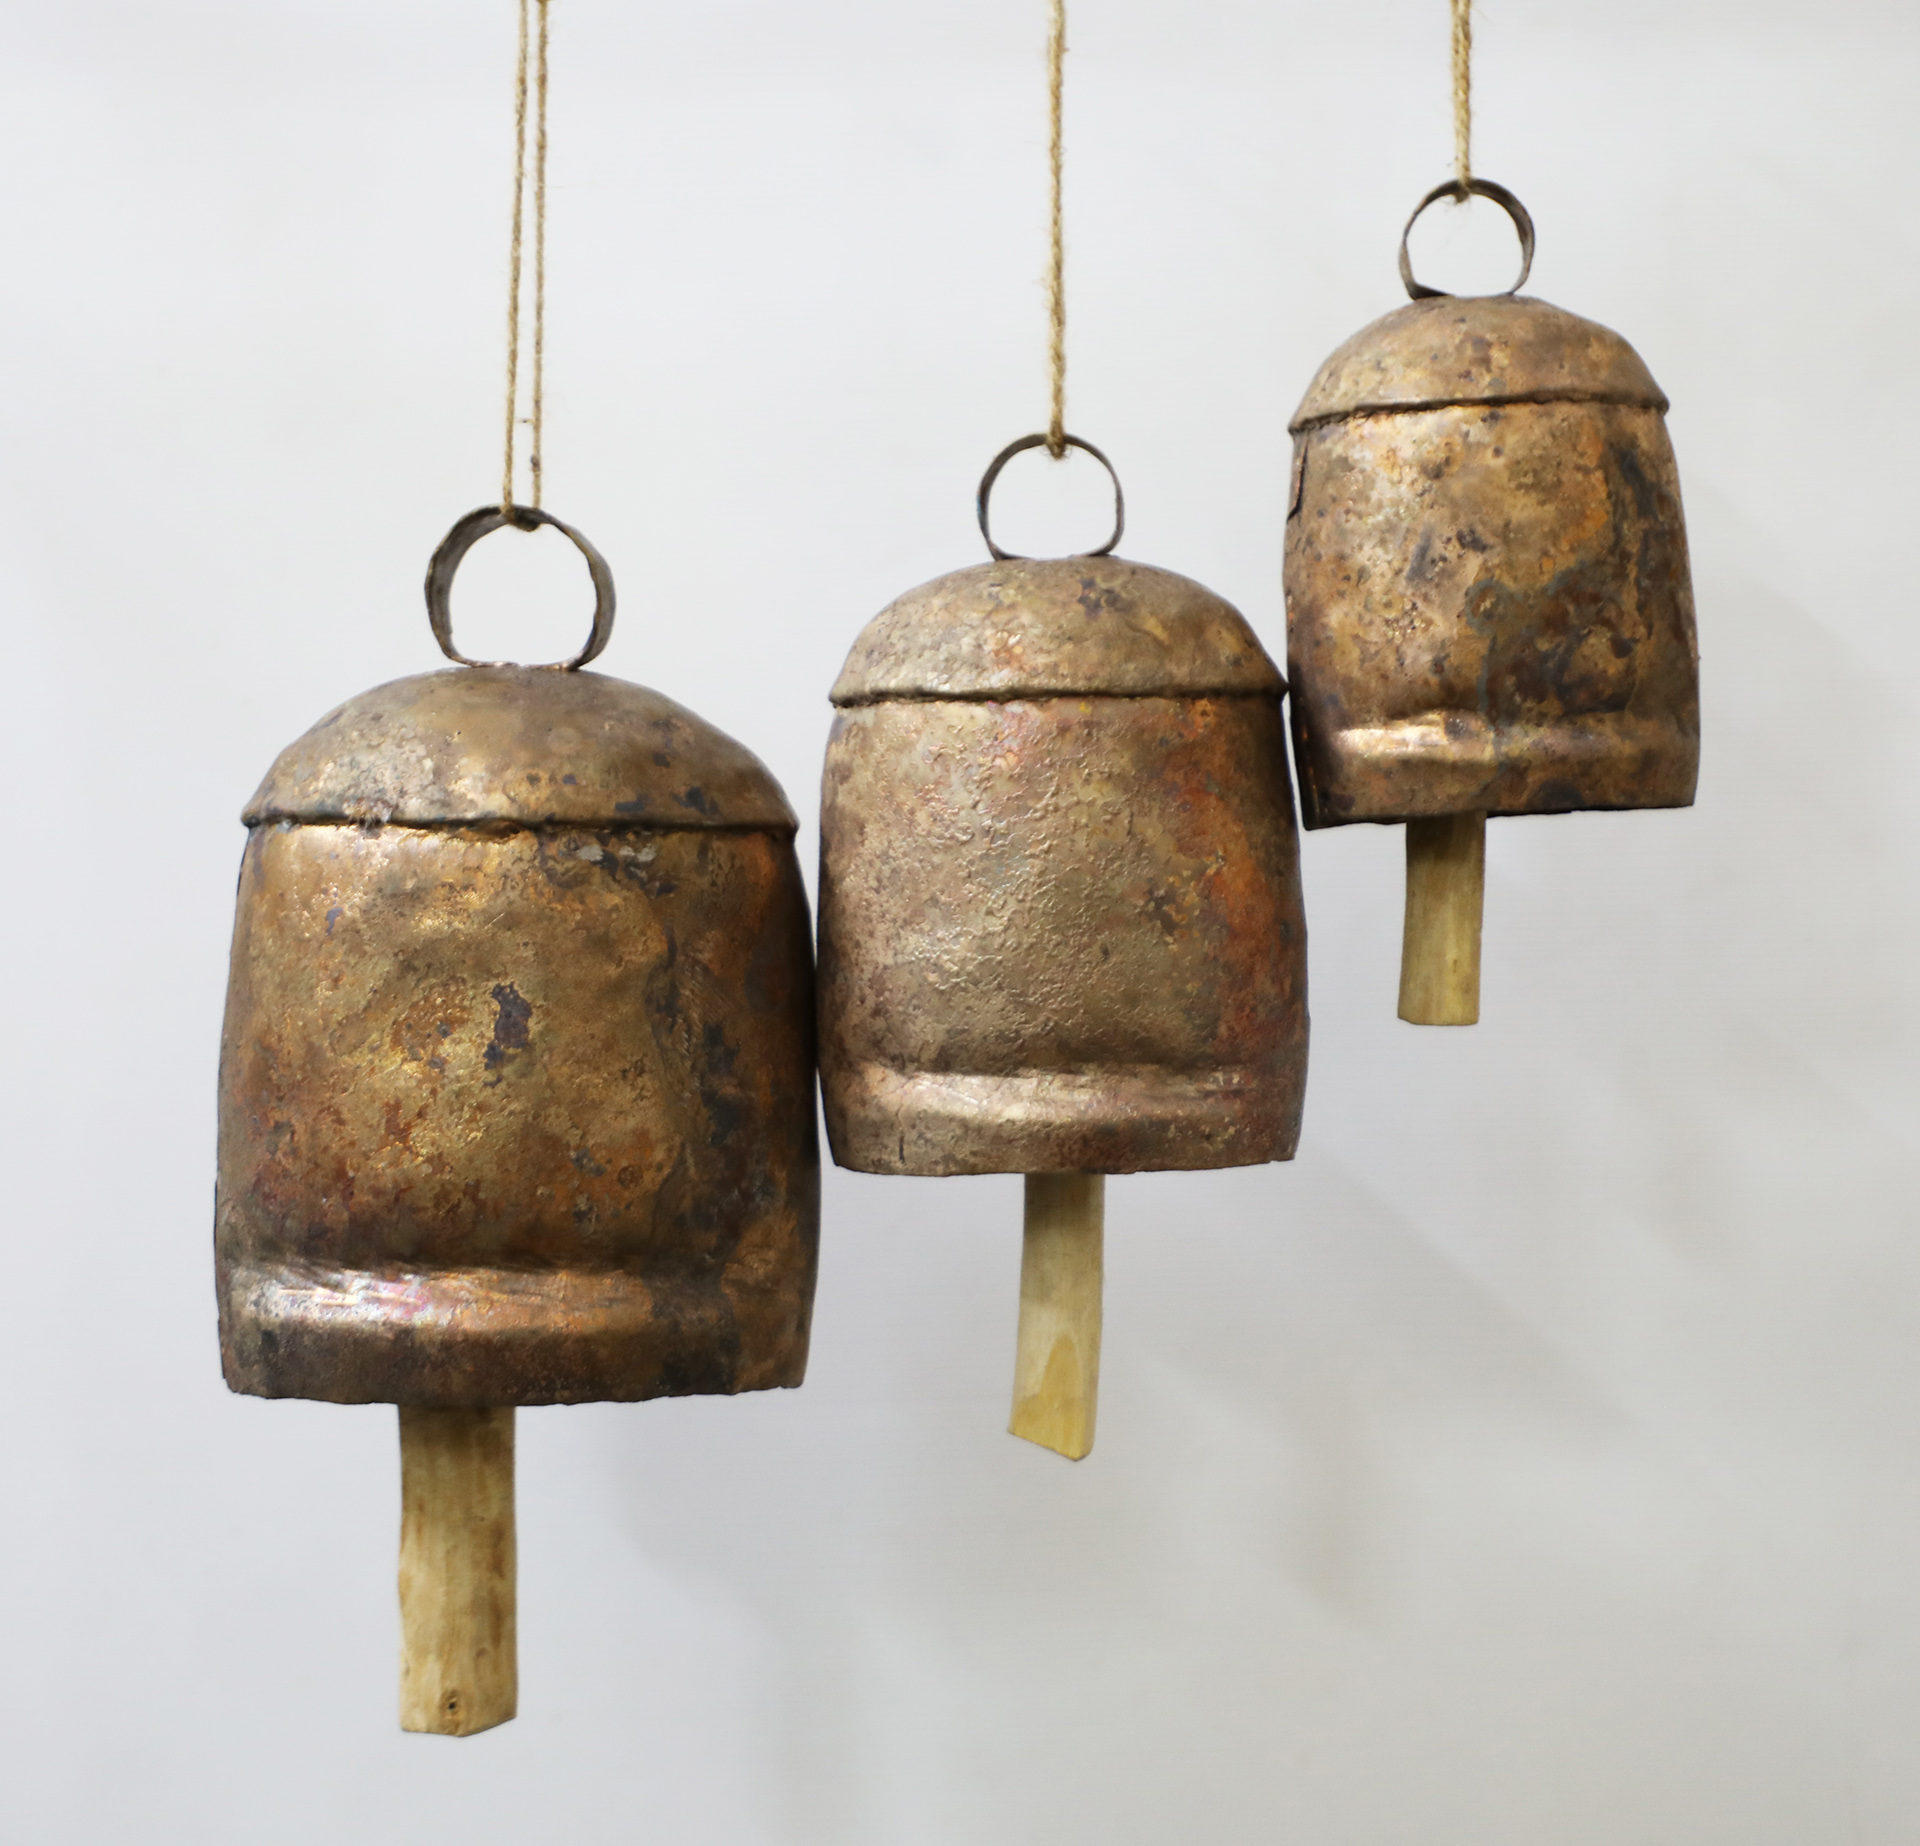 Antique Metal Cow Bells Wind Chime of 13 Bells • Vritti Designs